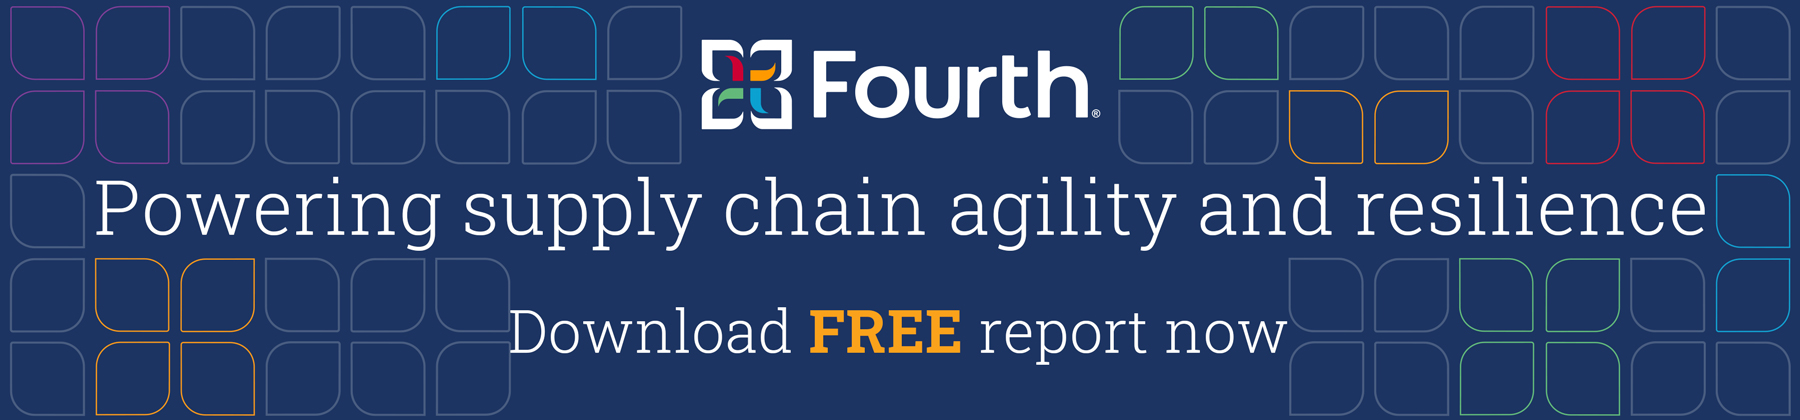 Fourth – Powering supply chain agility and resilience – Download FREE report now